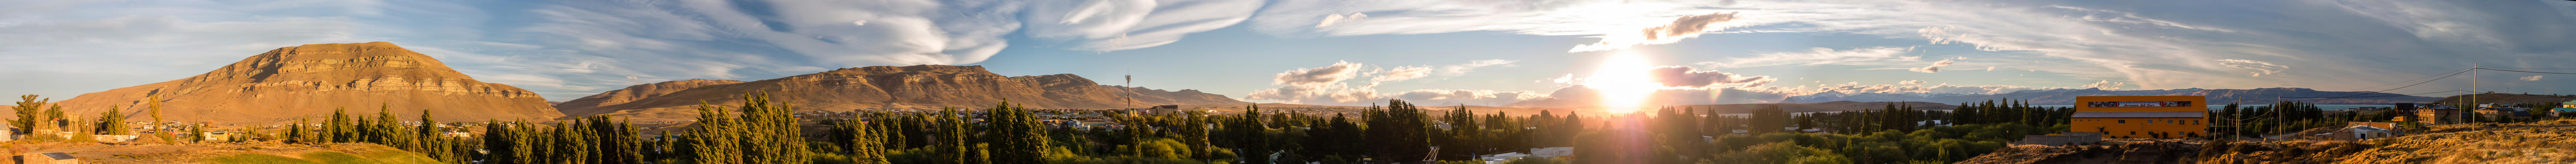 El Calafate Town Sunset - A full 360 degree view of the mountains basked in sunset above the town of El Calafate